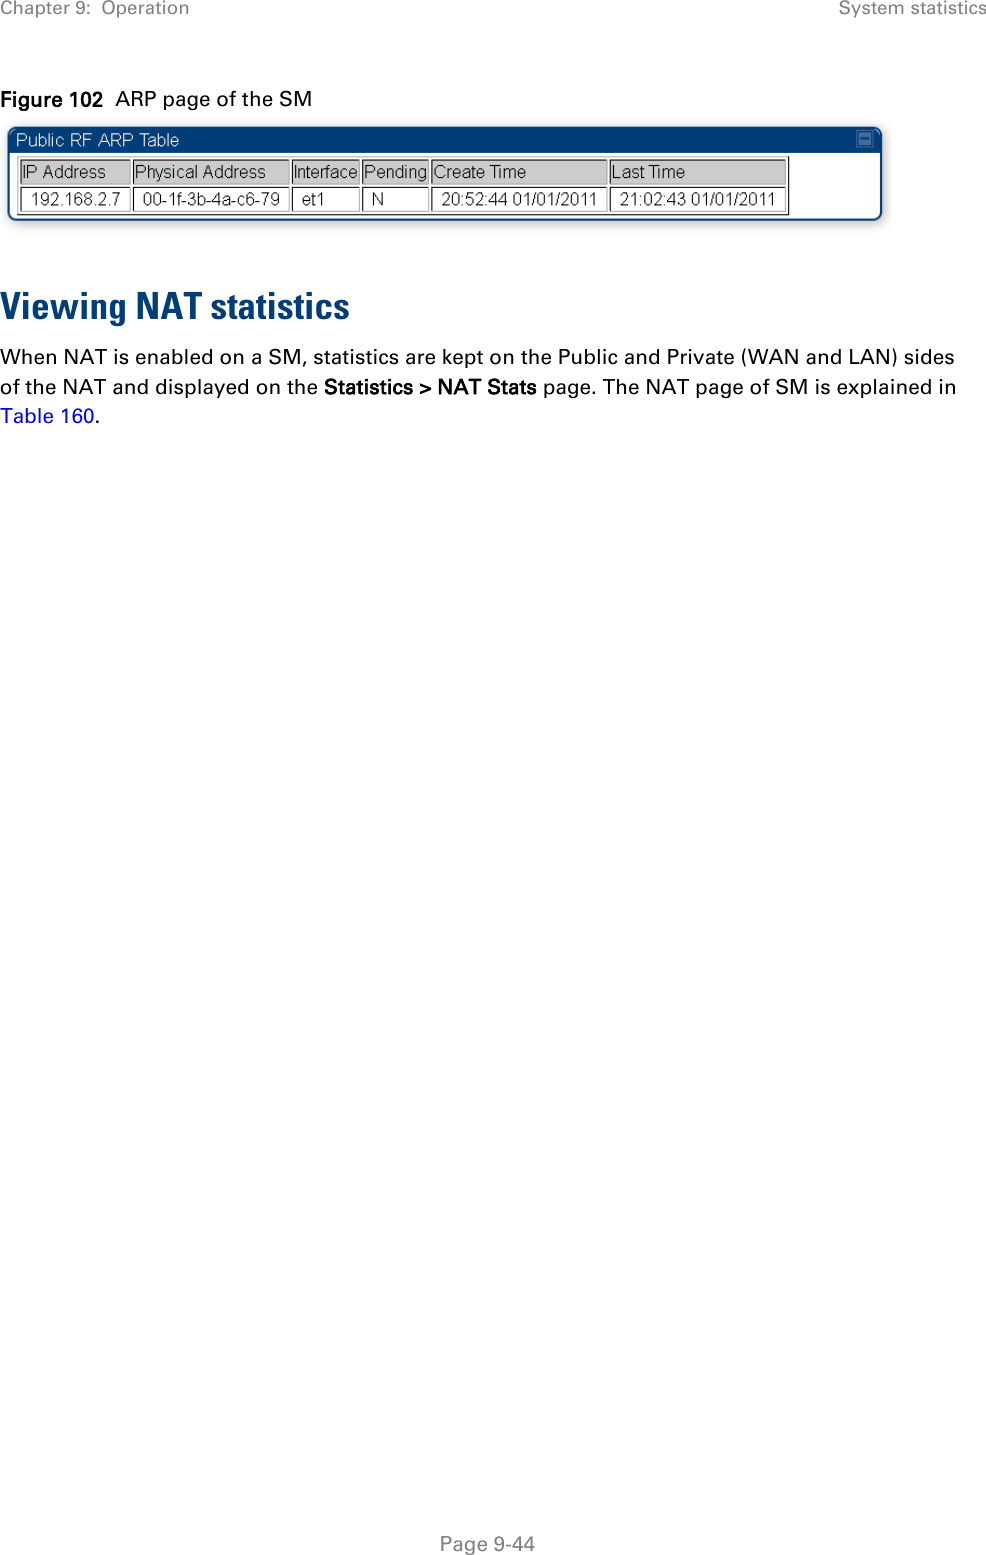 Chapter 9:  Operation System statistics   Page 9-44 Figure 102  ARP page of the SM   Viewing NAT statistics When NAT is enabled on a SM, statistics are kept on the Public and Private (WAN and LAN) sides of the NAT and displayed on the Statistics &gt; NAT Stats page. The NAT page of SM is explained in Table 160.   